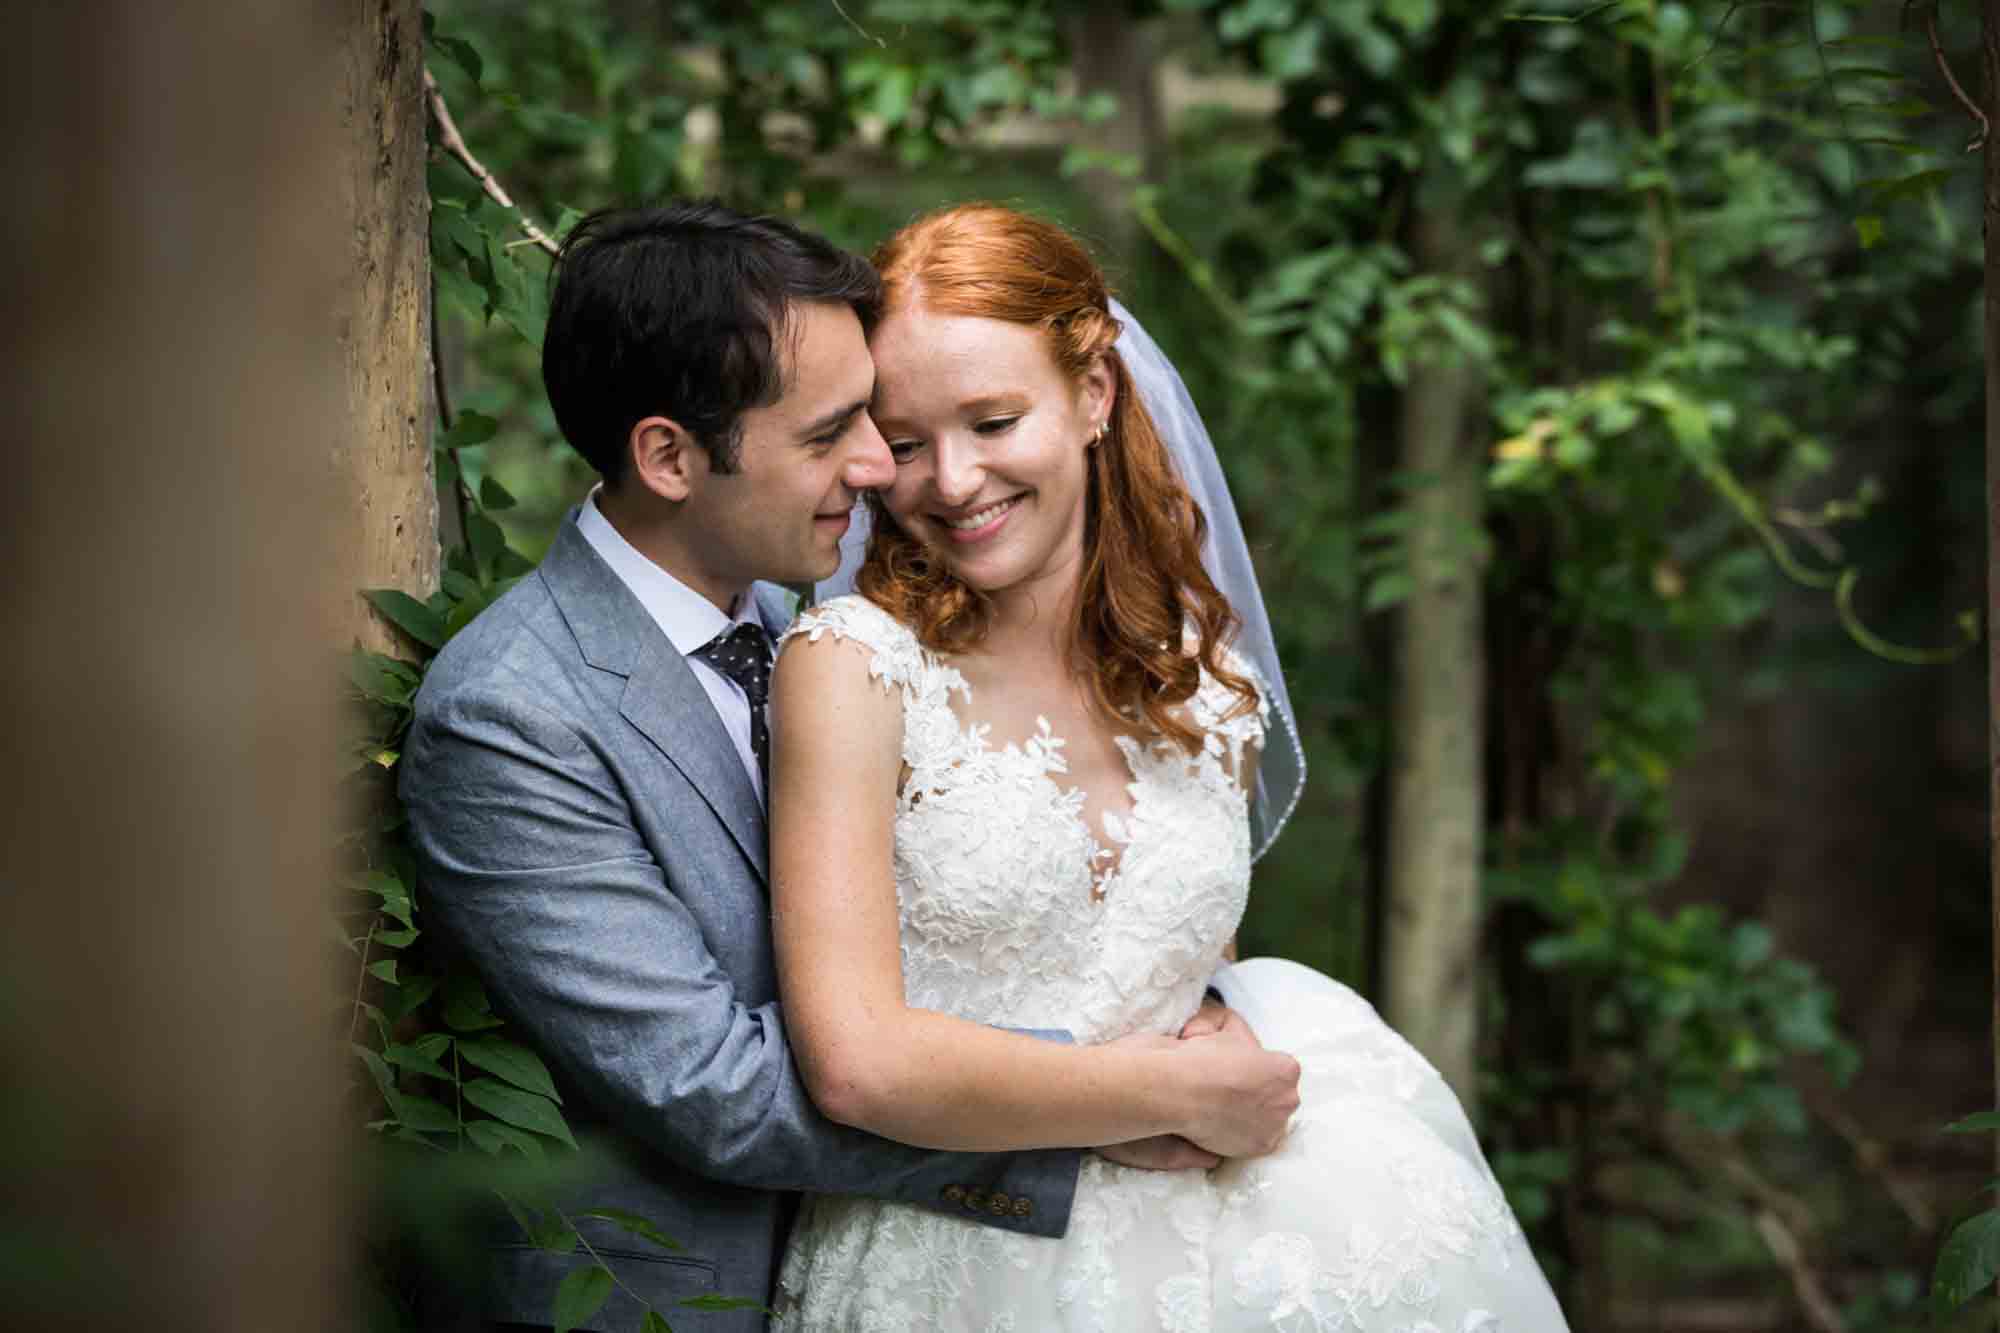 Bride and groom hugging in forest for an article on backyard wedding tips